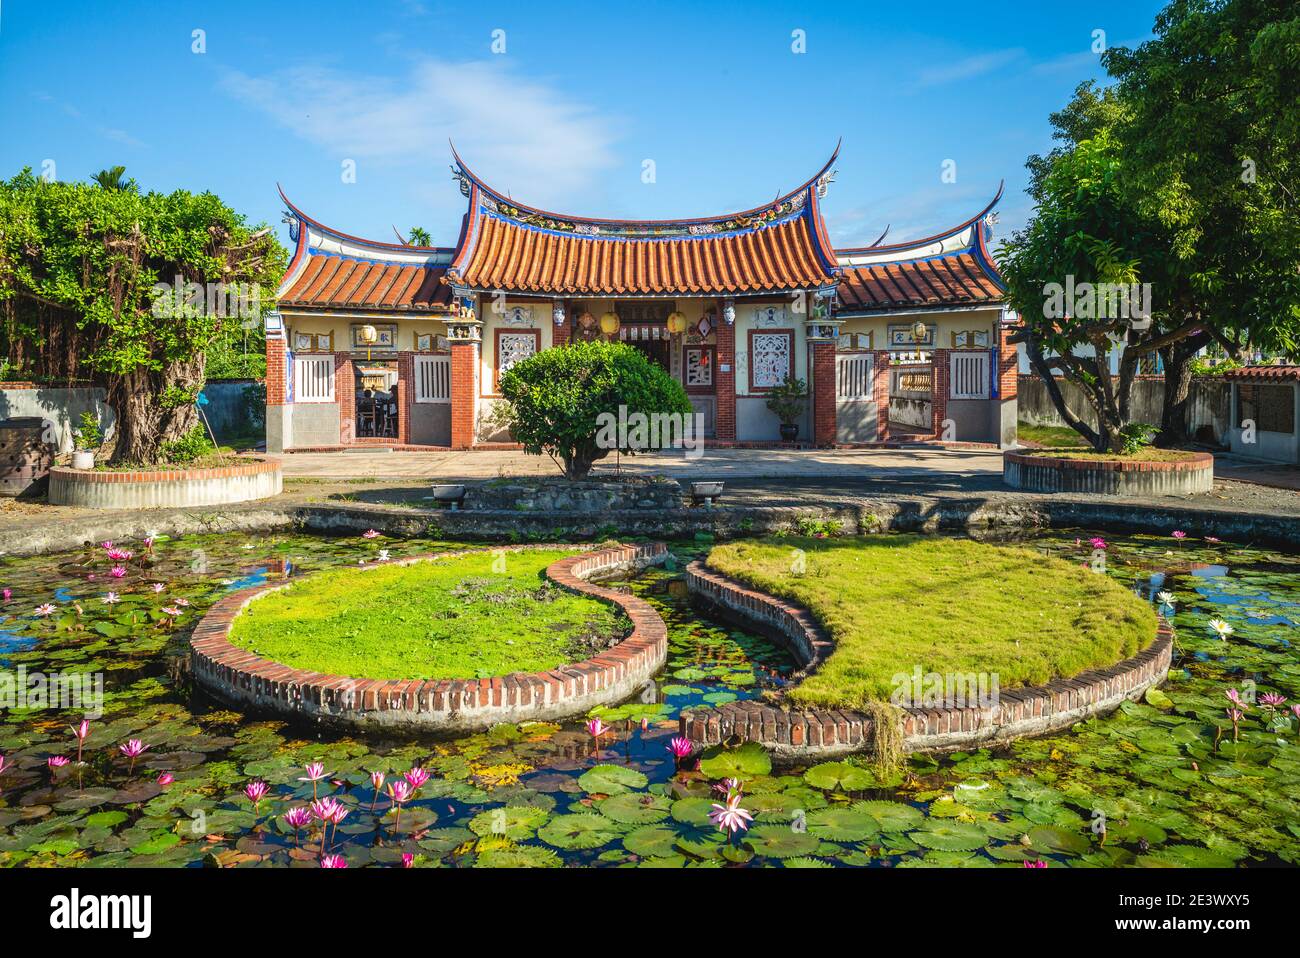 December 24, 2020: Yang Family Ancestral Hall, an ancestral shrine in Jiadong Township, Pingtung County, Taiwan, was built in 1923 with funds collecte Stock Photo